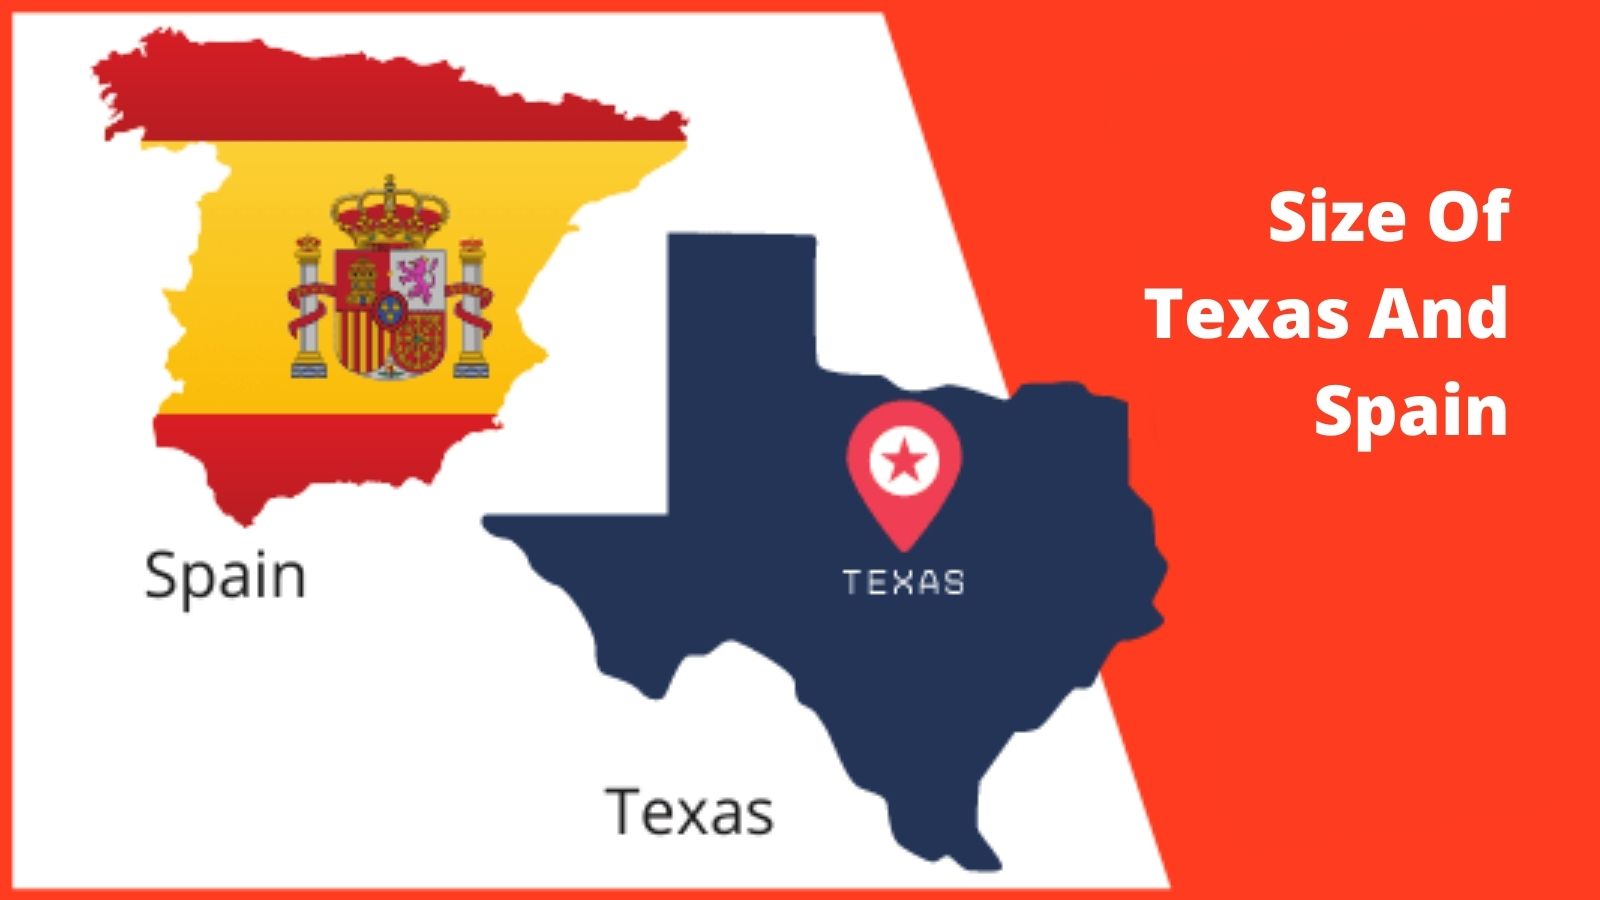 Spain compared to Texas